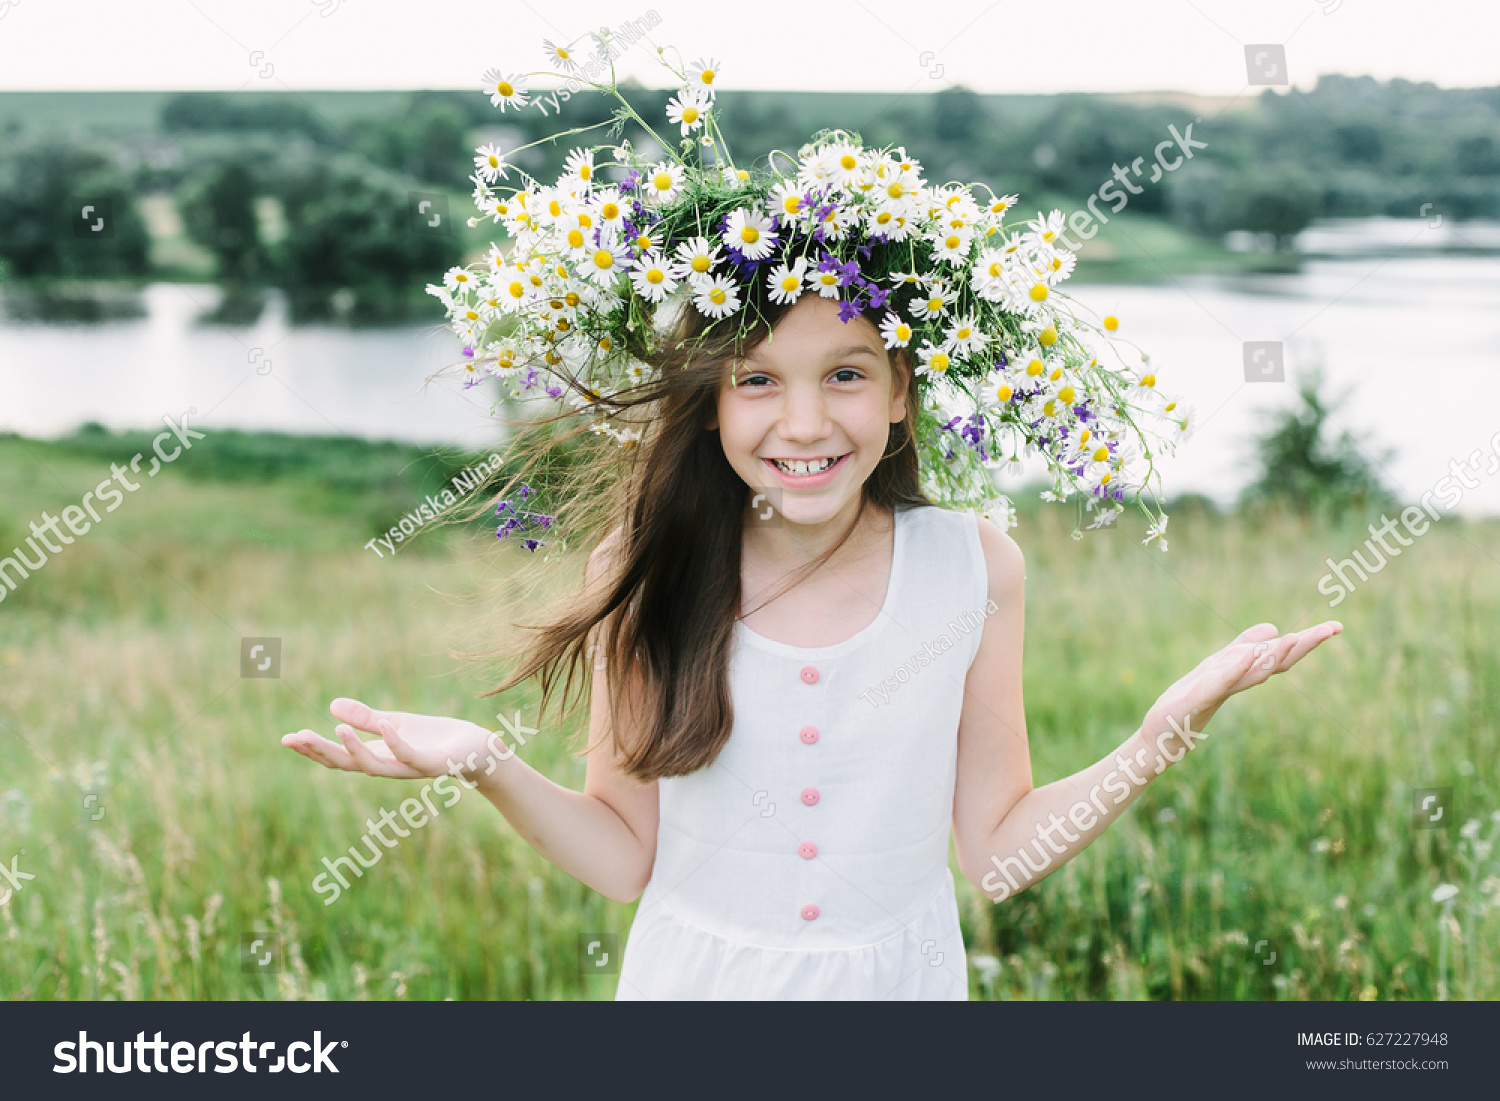 Little girls wear flower wreath plays the ape and grimacing #627227948